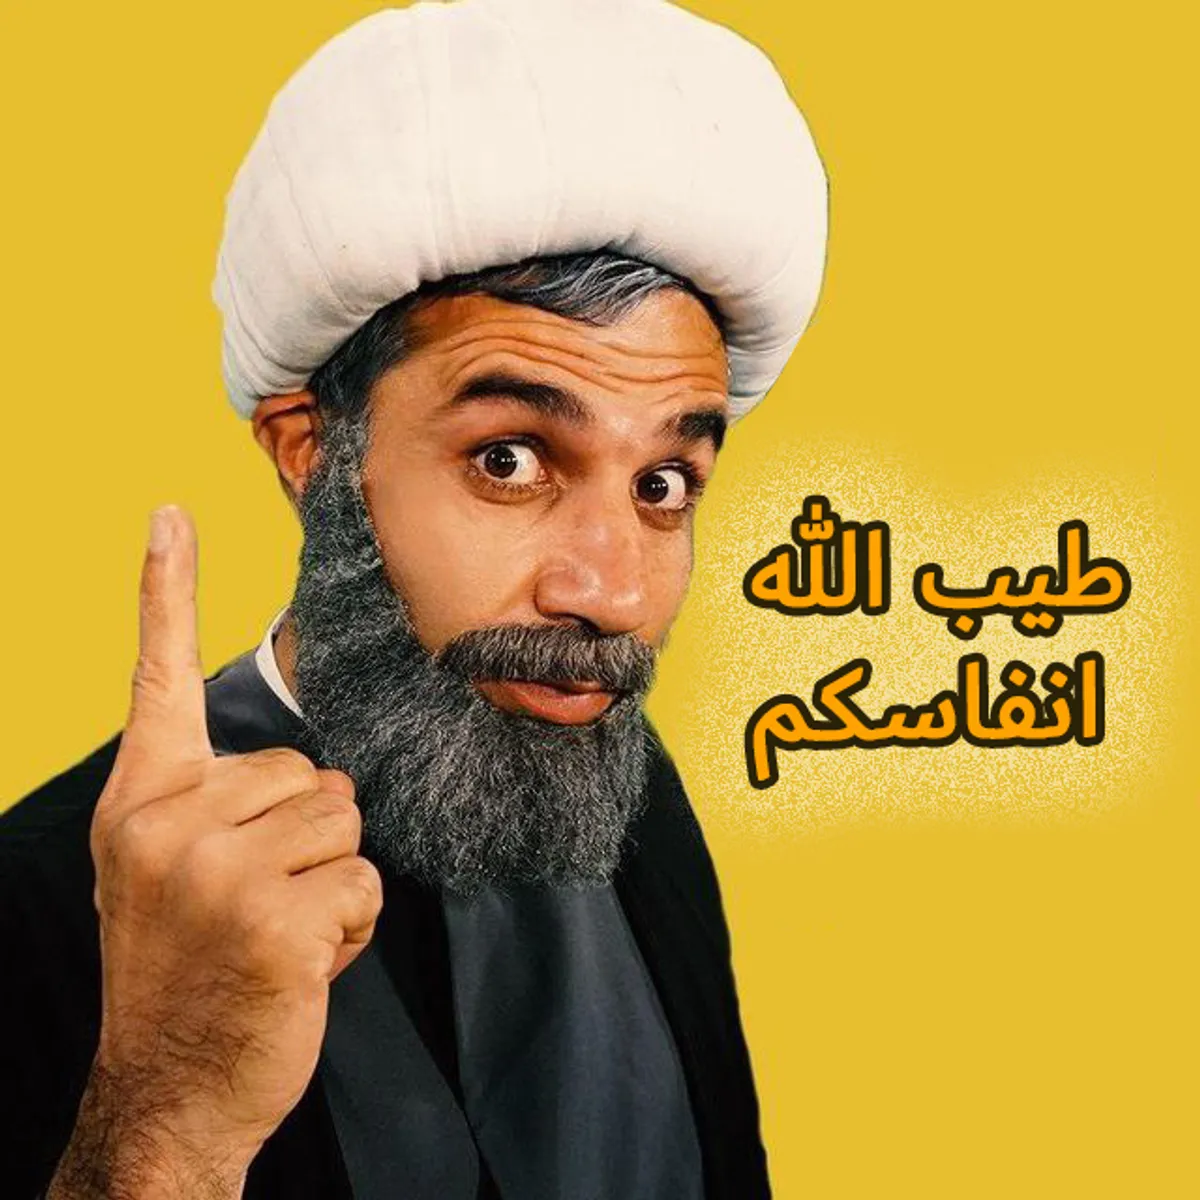 Tanzolemareh is a political comedy channel exposing the Mullahs in Iran ...